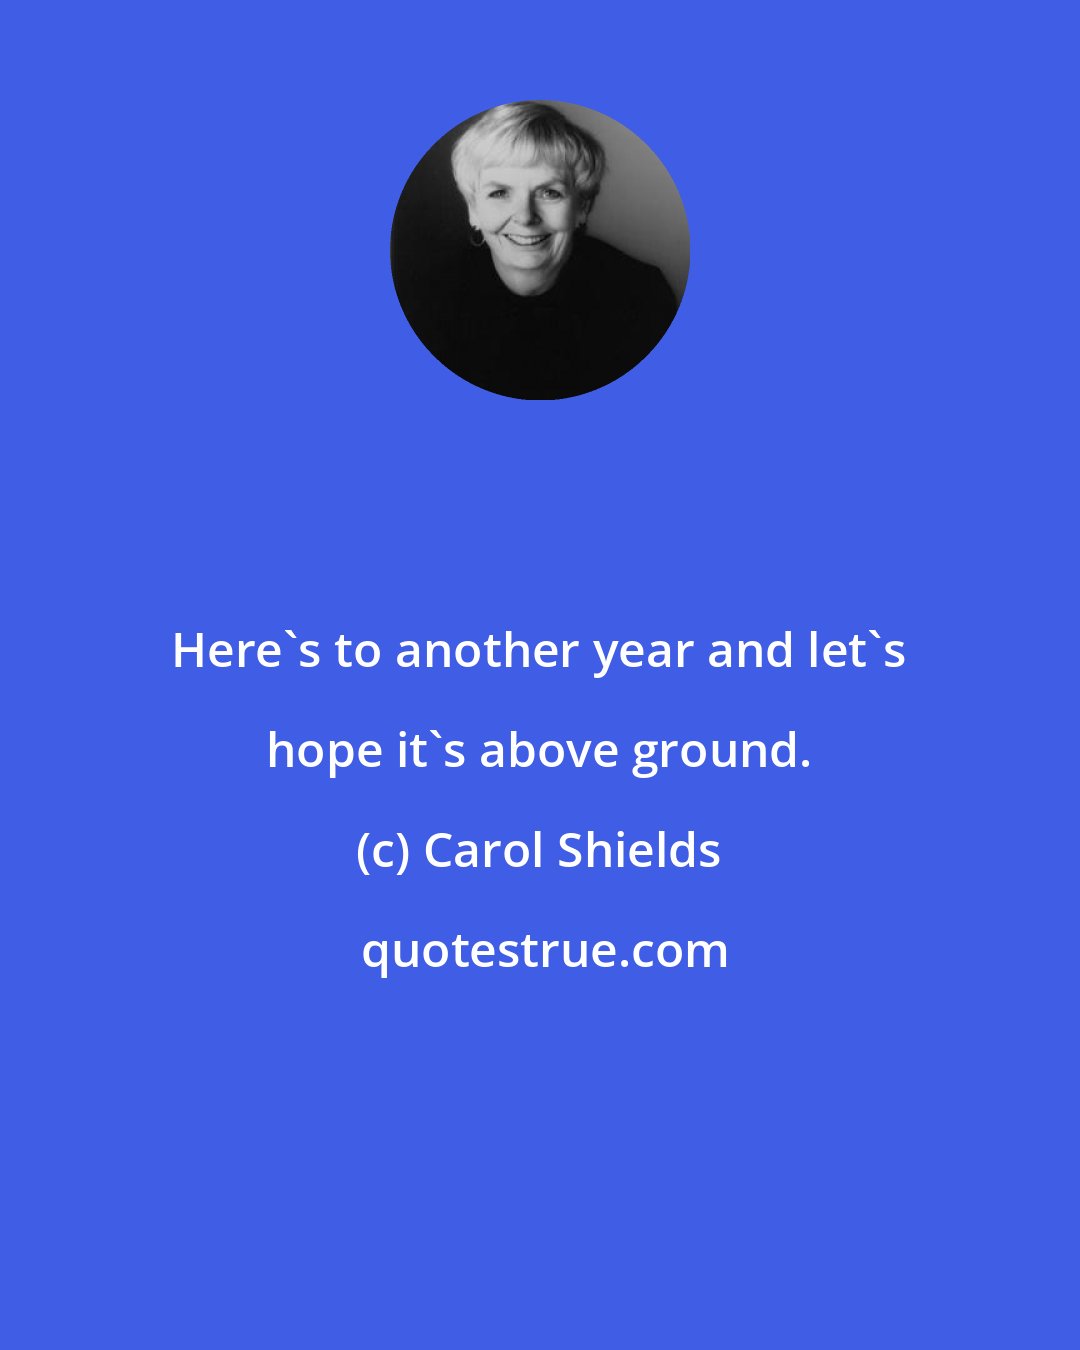 Carol Shields: Here's to another year and let's hope it's above ground.